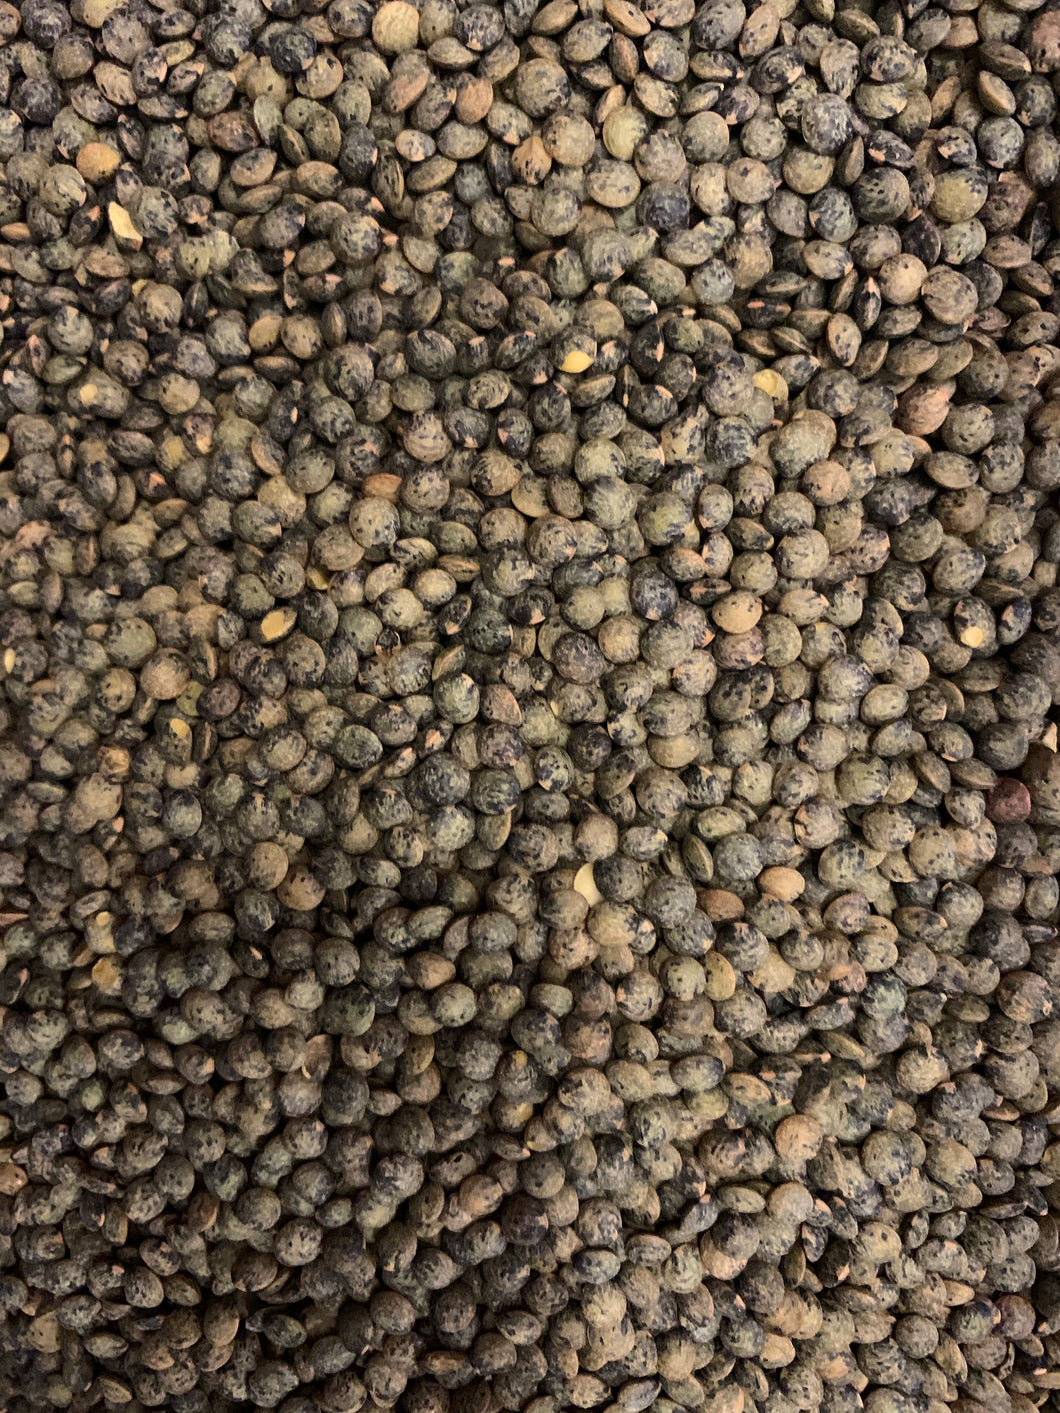 Lentils- French Type Puy 500g